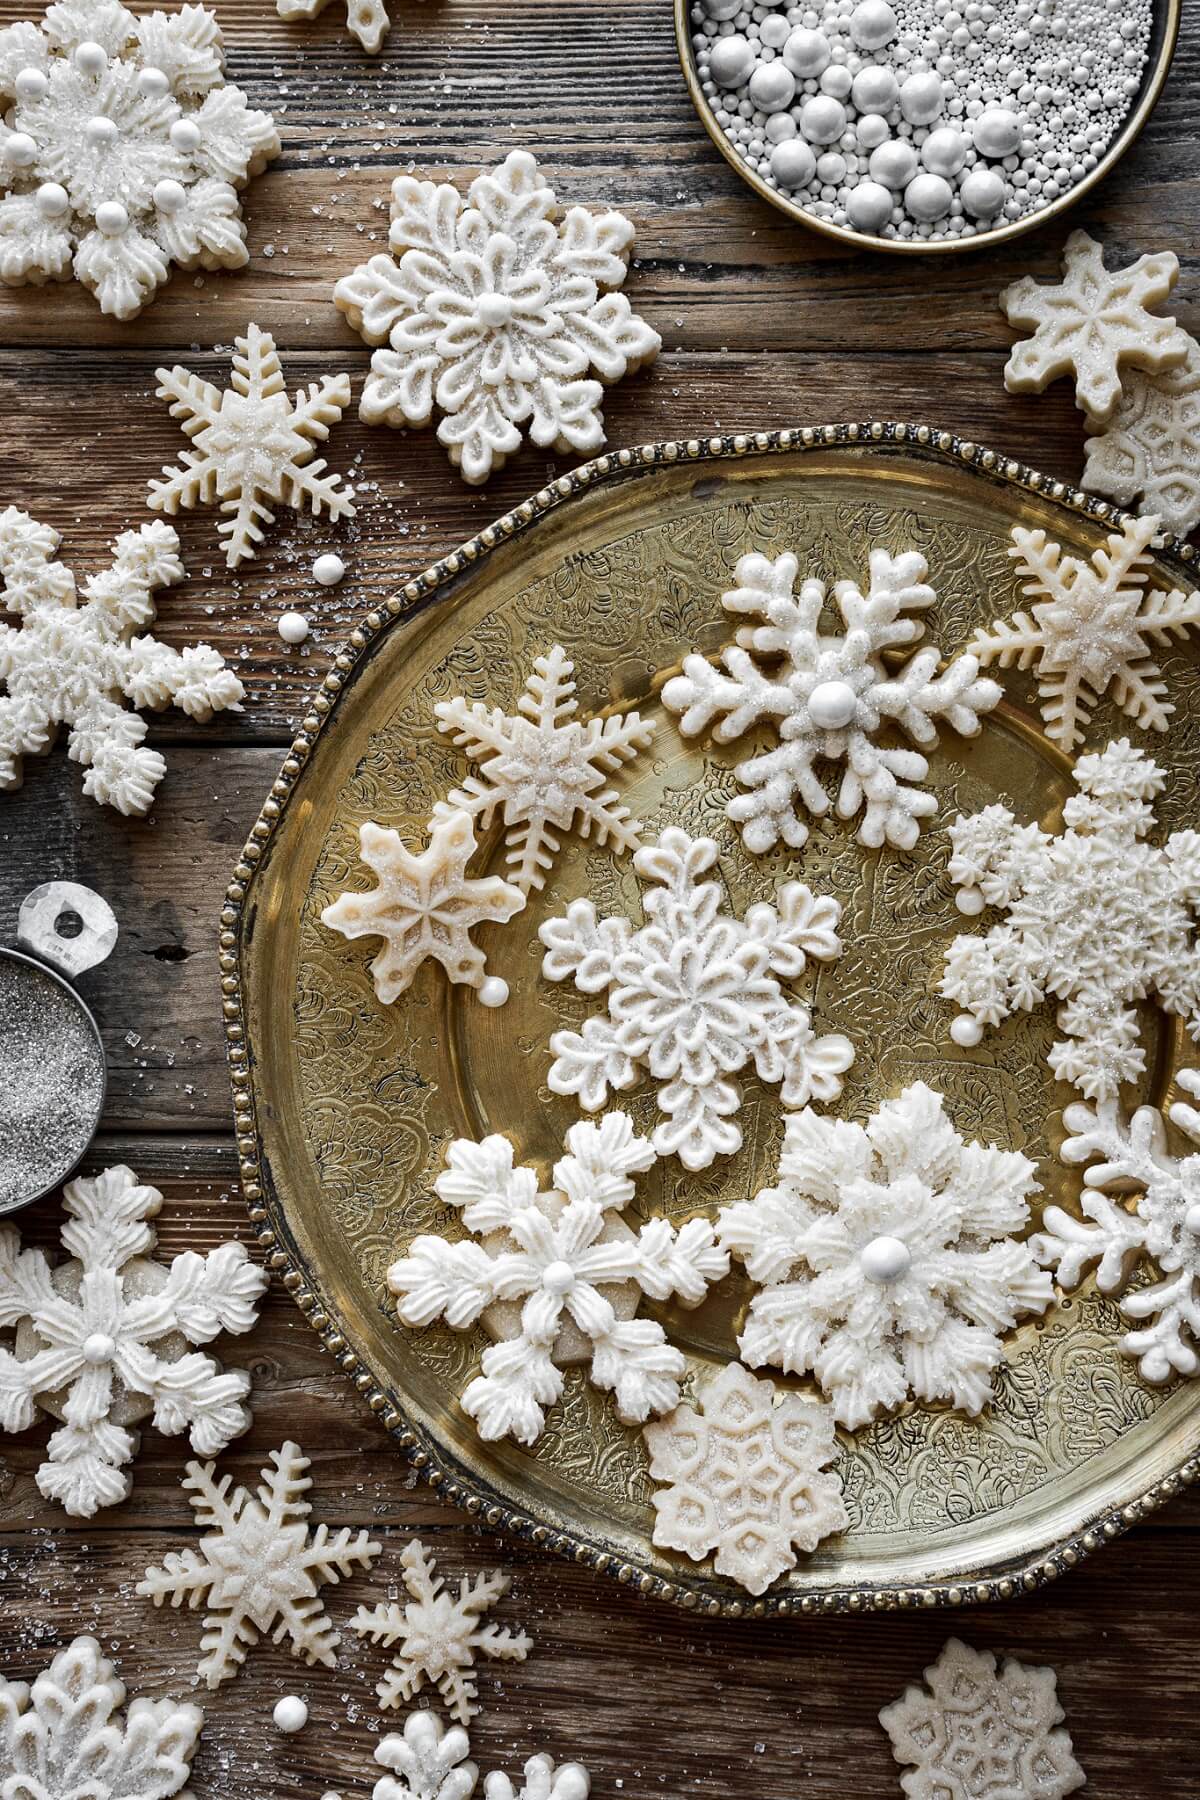 Snowflake sugar cookies on a gold plate.